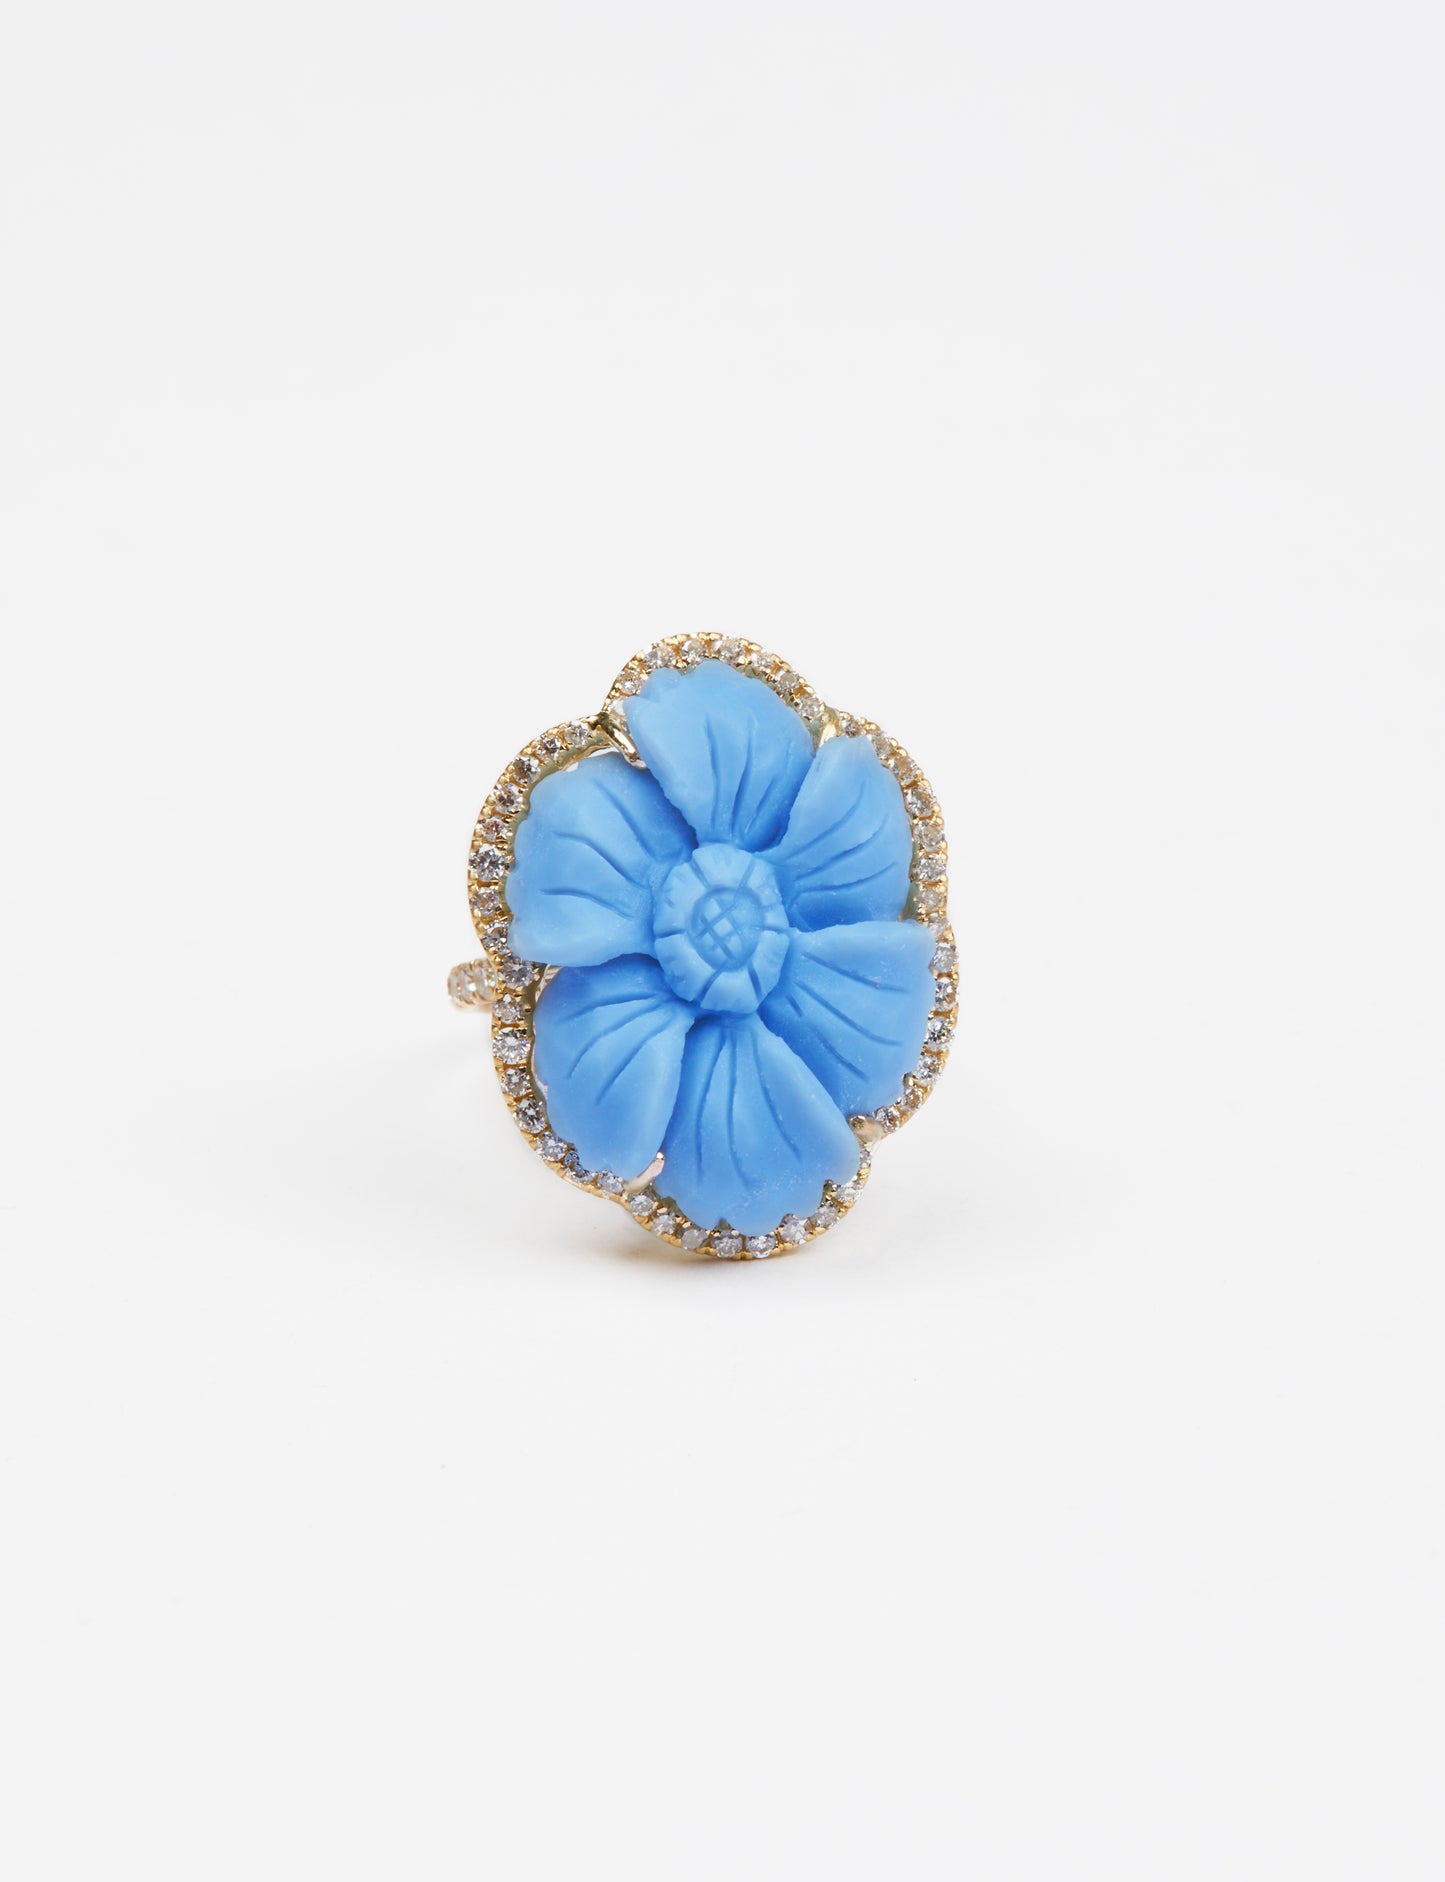 Blue Opal Carved Flower with Diamond Surround and Diamond Band